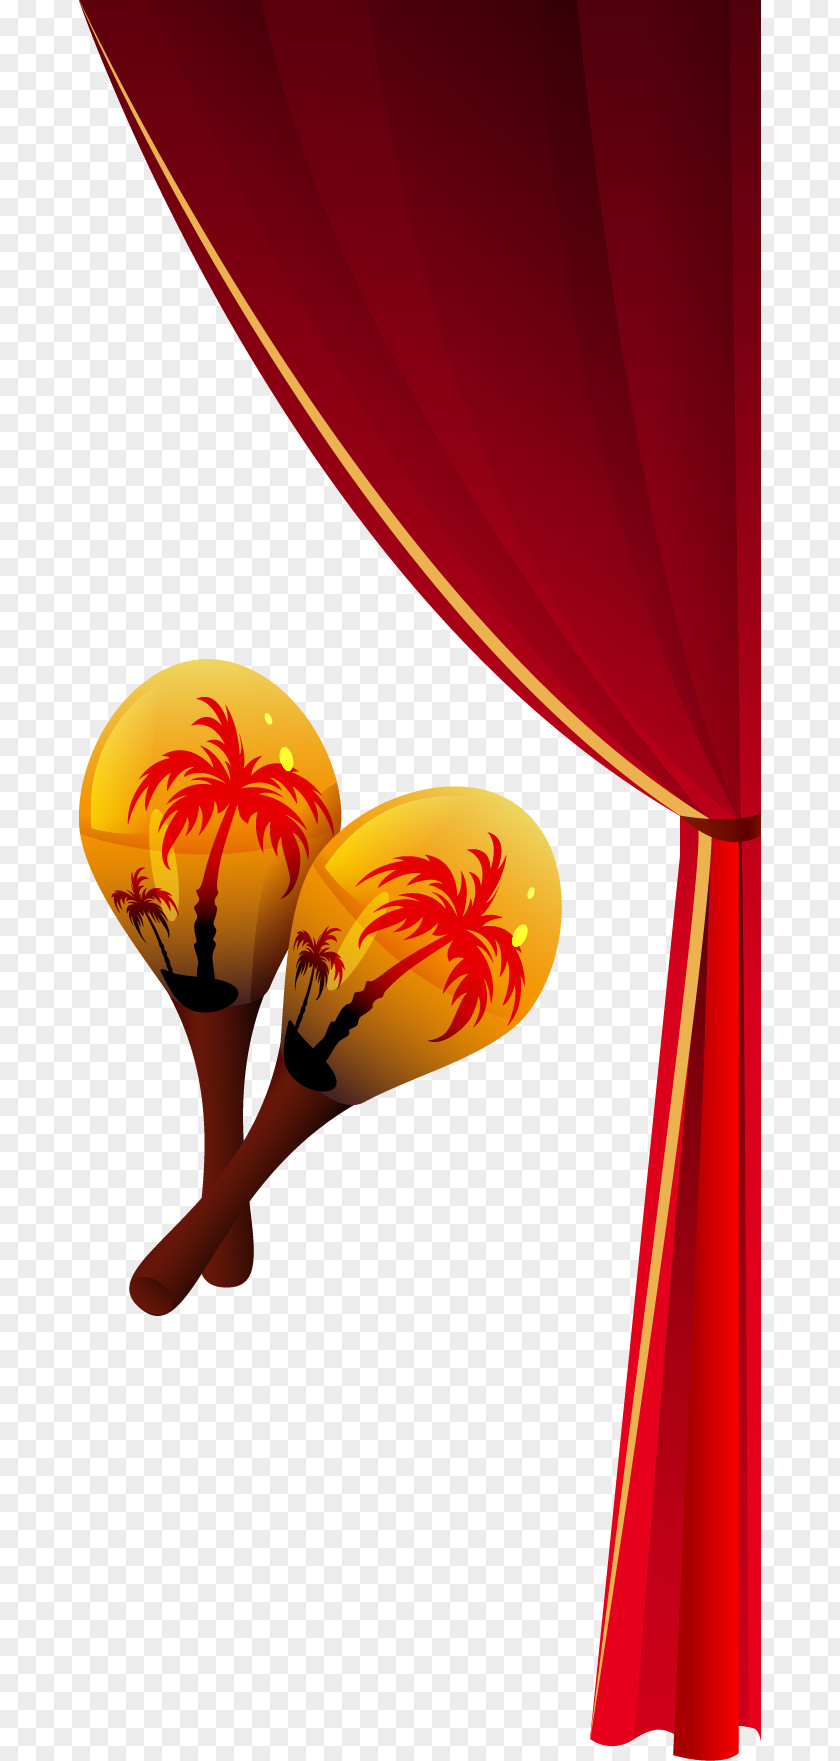 Vector Red Zipper Maraca Musical Instrument Photography Illustration PNG